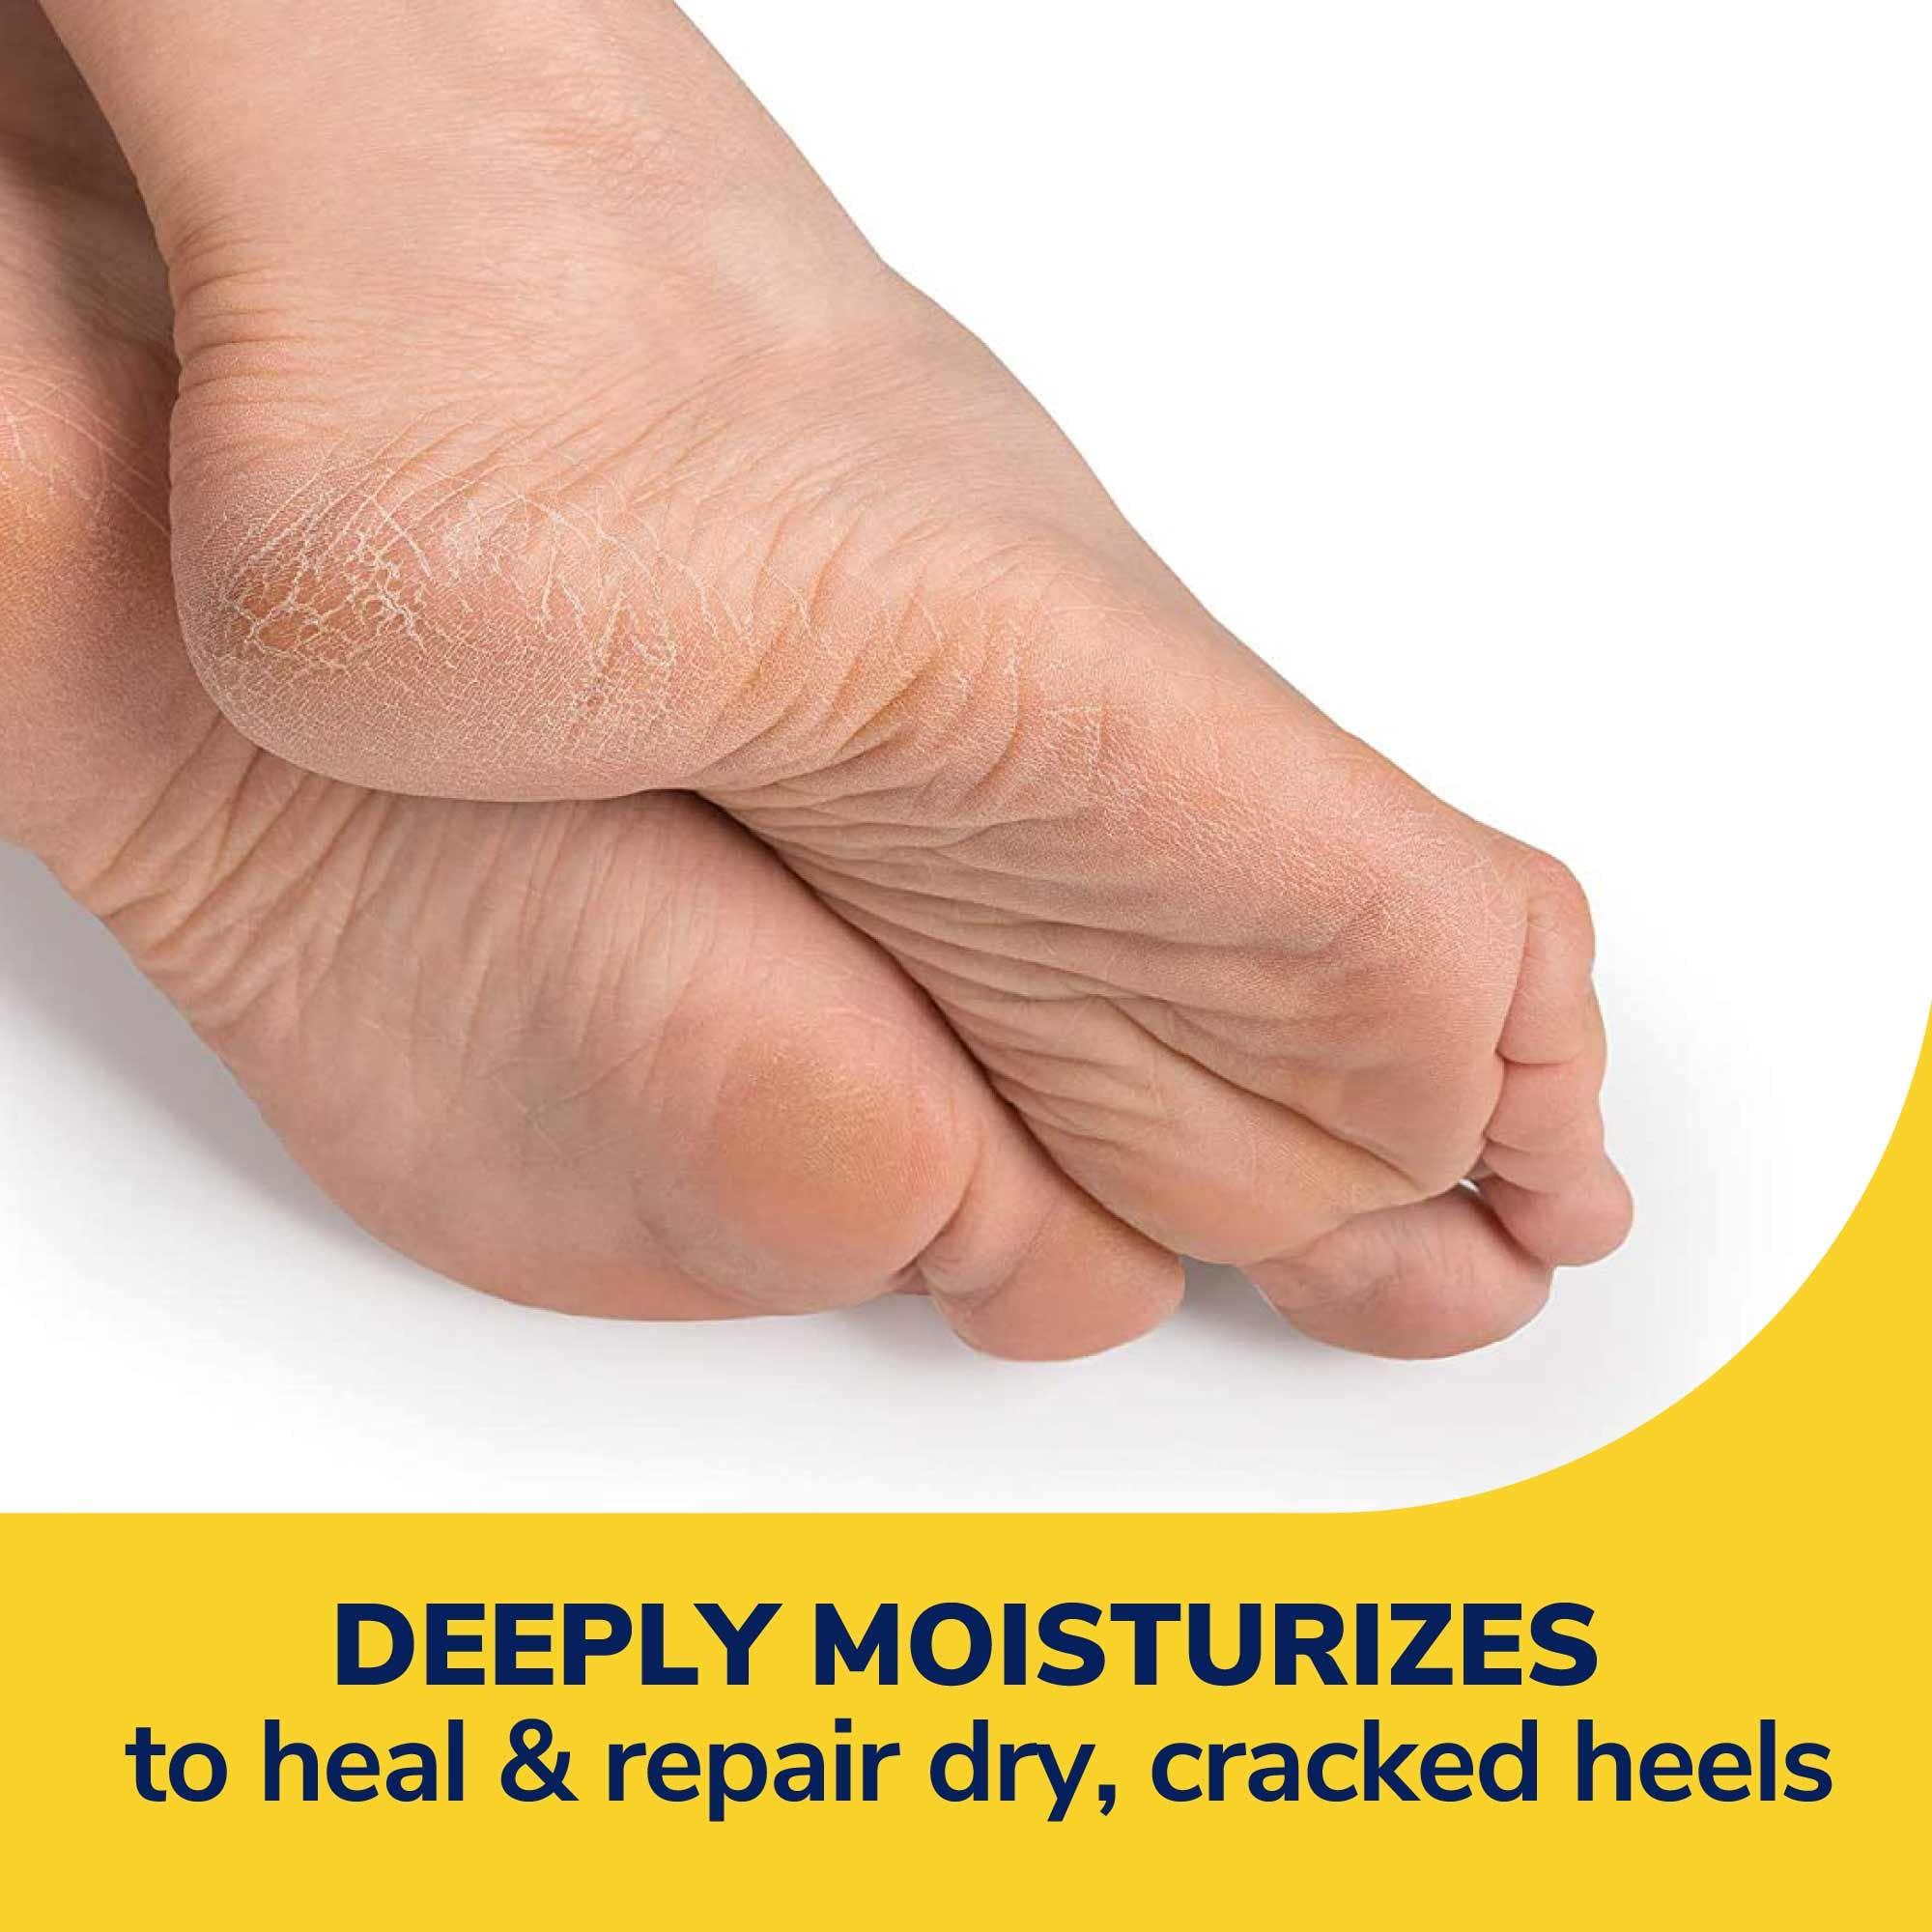 Dr. Scholl's Severe Cracked Heel Repair Restoring Balm 2.5oz & Dry, Cracked Skin Ultra-Hydrating Foot Mask, Intensely Moisturizes Repairs and Softens Rough Dry Skin with Urea, 1 Pair